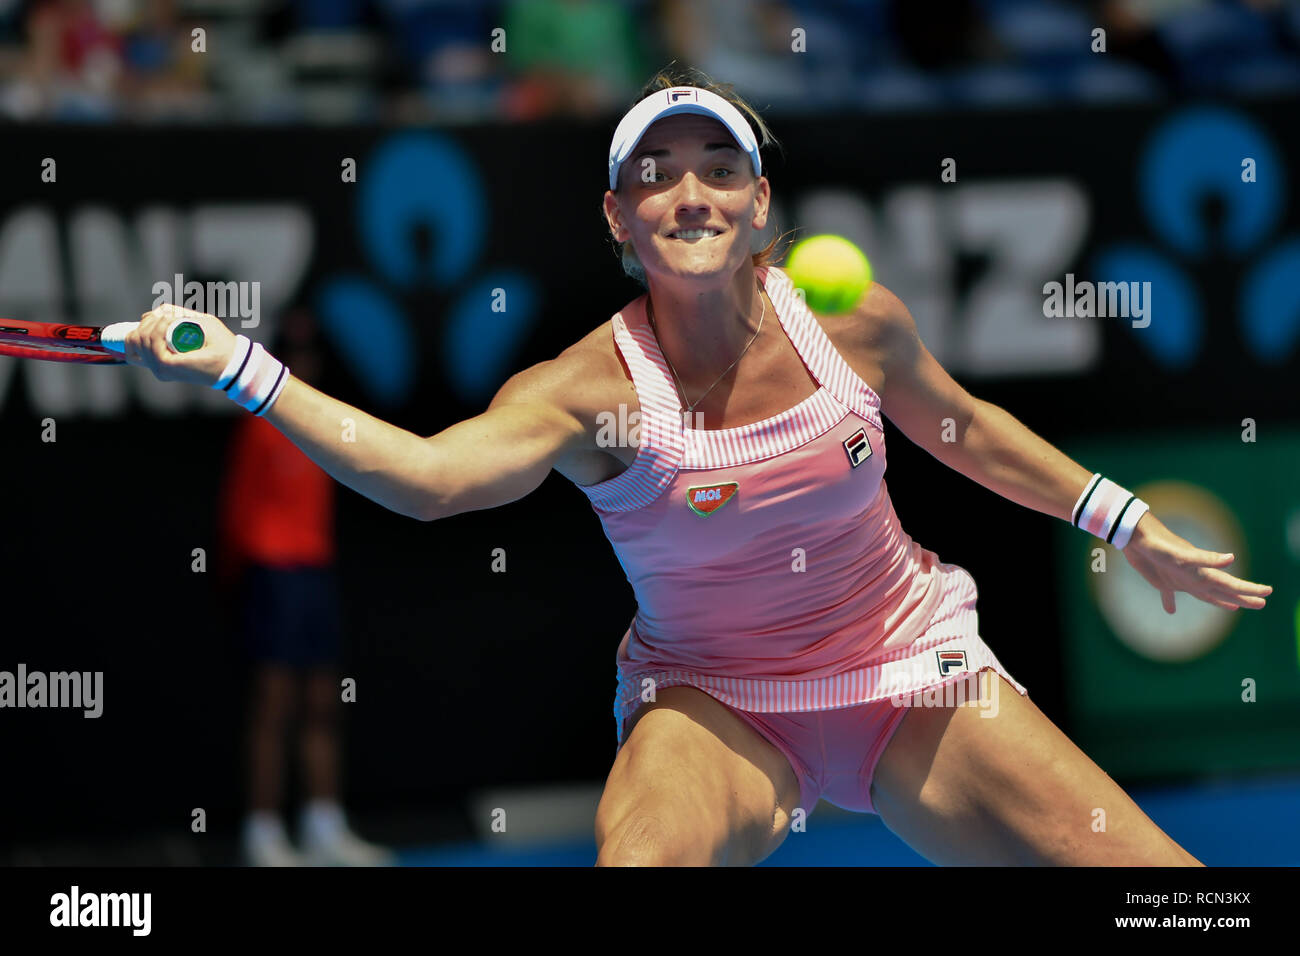 Timea Babos High Resolution Stock Photography and Images - Alamy